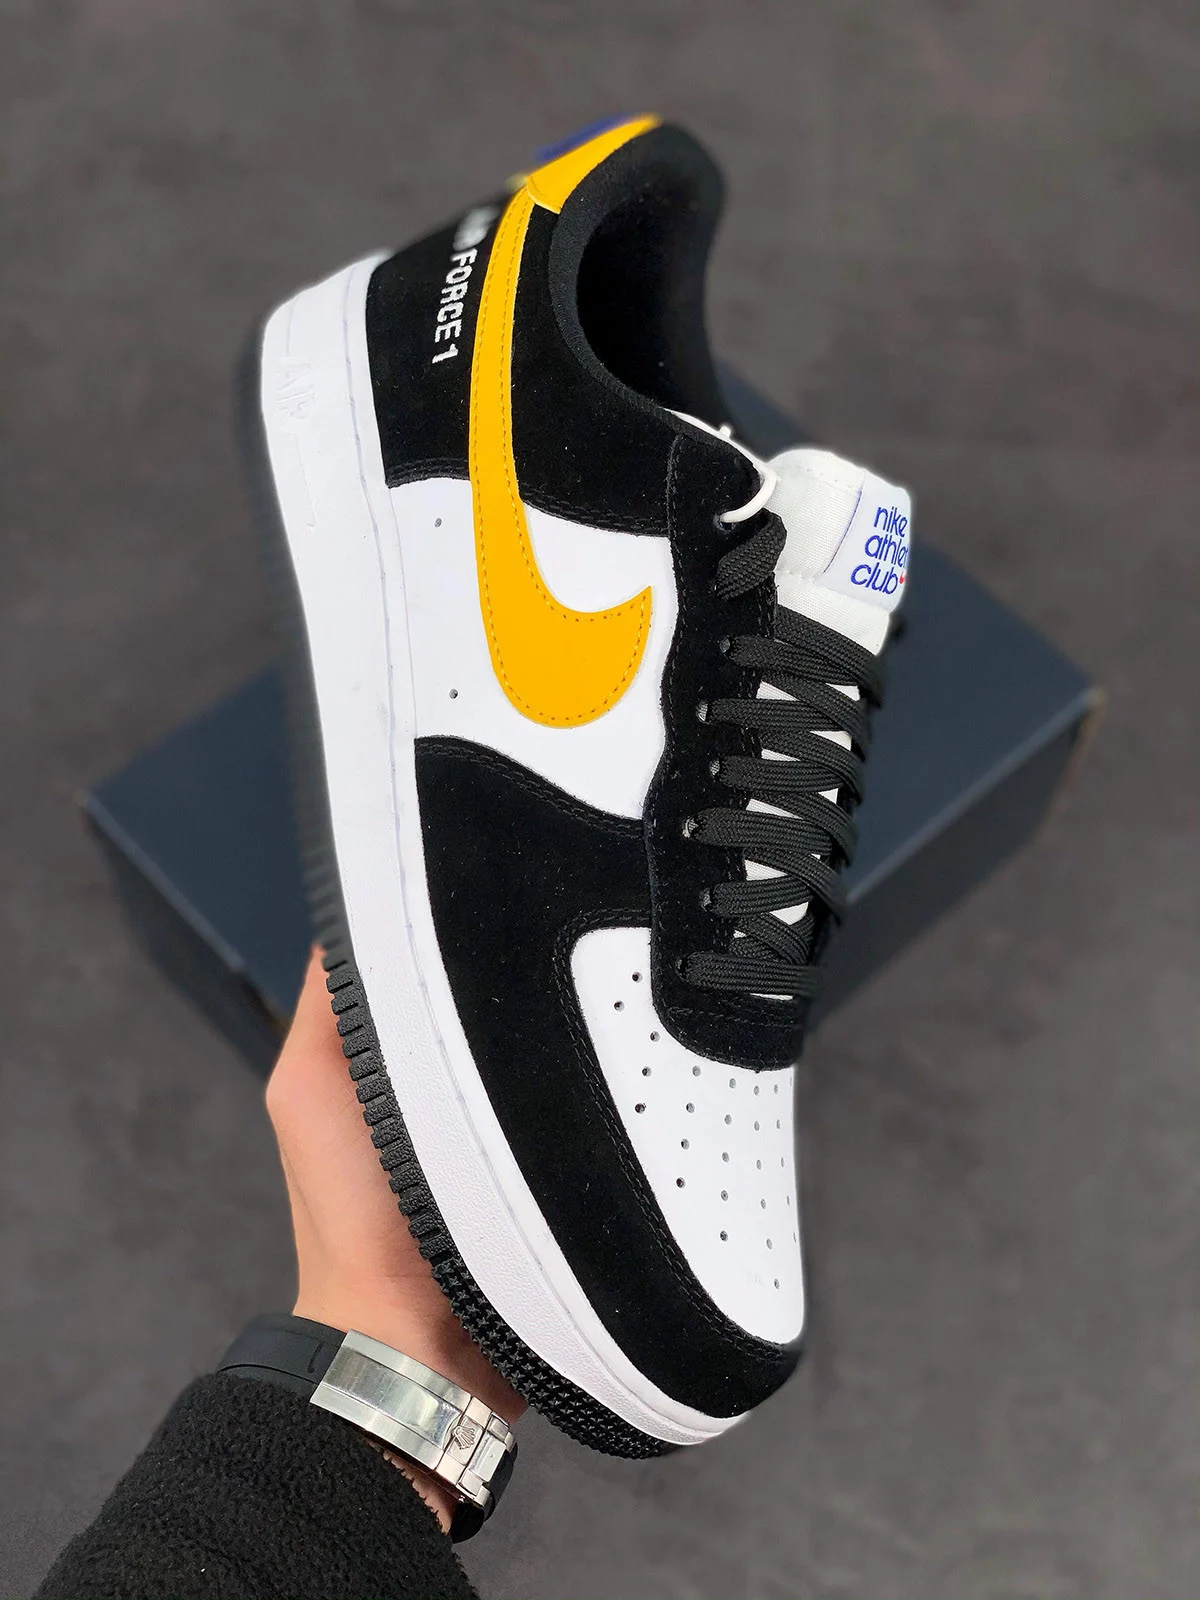 Nike Air Force 1 Low Athletic Club Black White-University Gold For Sale